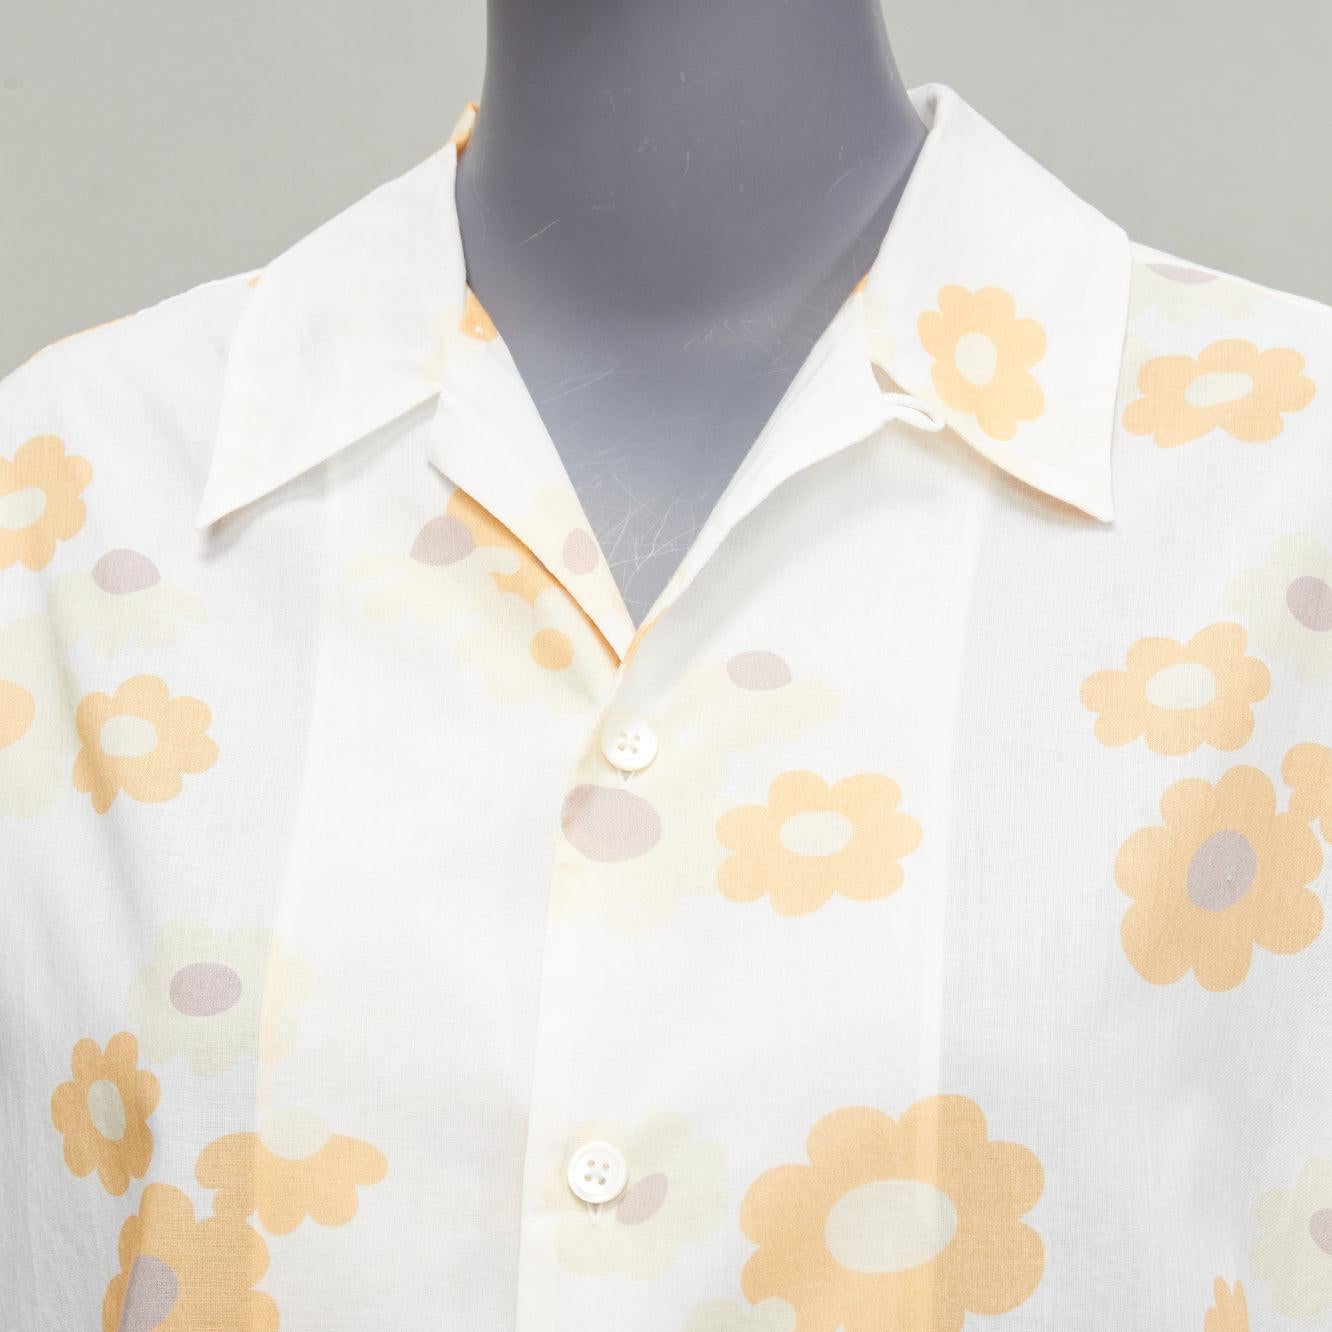 MARNI white yellow cotton vintage floral print short sleeve boxy shirt IT38 XS
Reference: CELG/A00329
Brand: Marni
Color: White, Yellow
Pattern: Floral
Closure: Button

CONDITION:
Condition: Excellent, this item was pre-owned and is in excellent